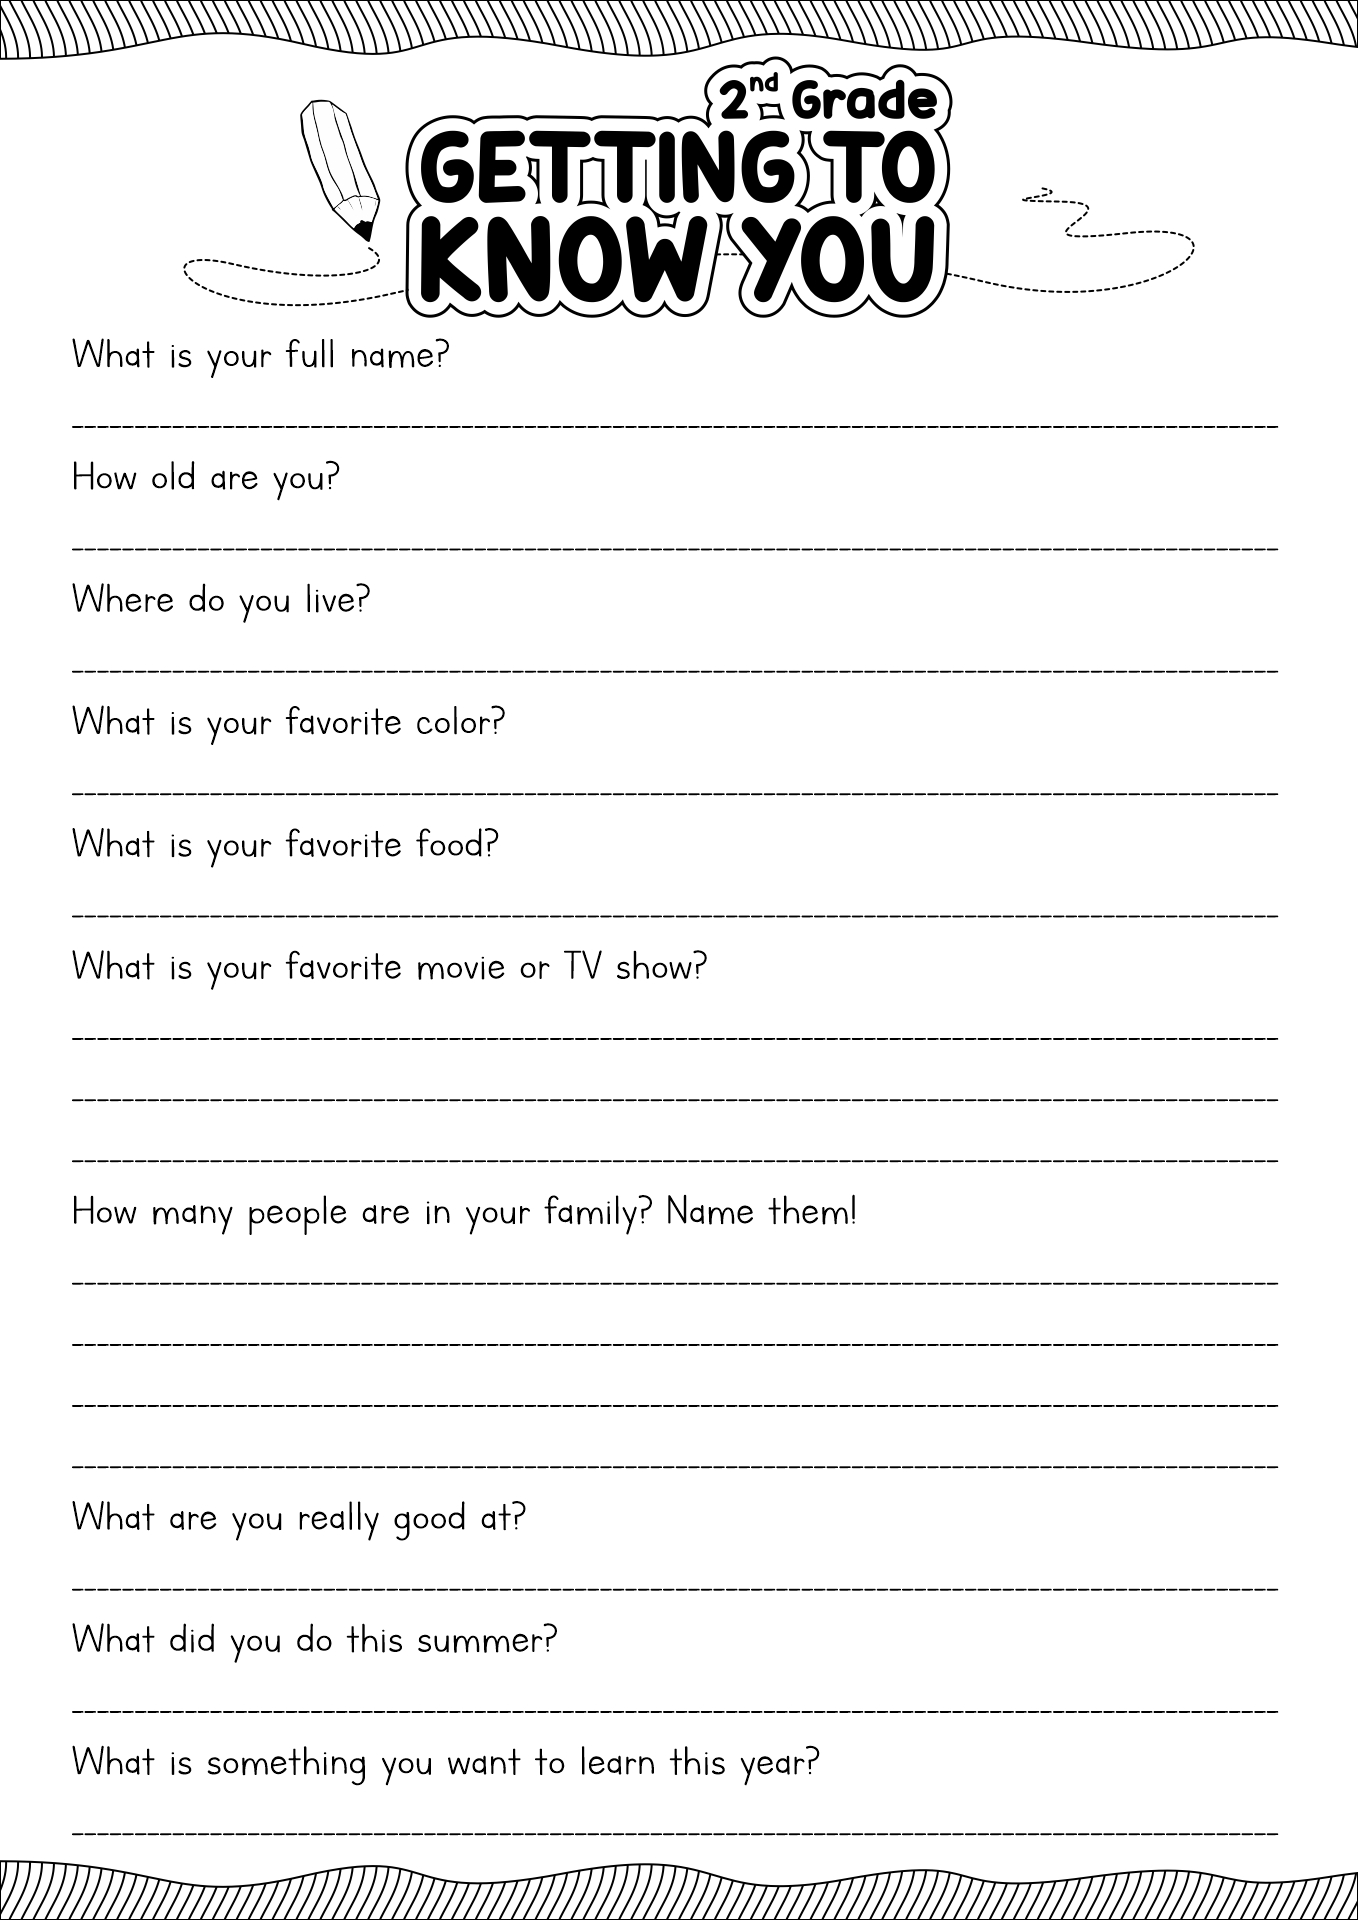 Free Getting To Know You Printables Printable Templates